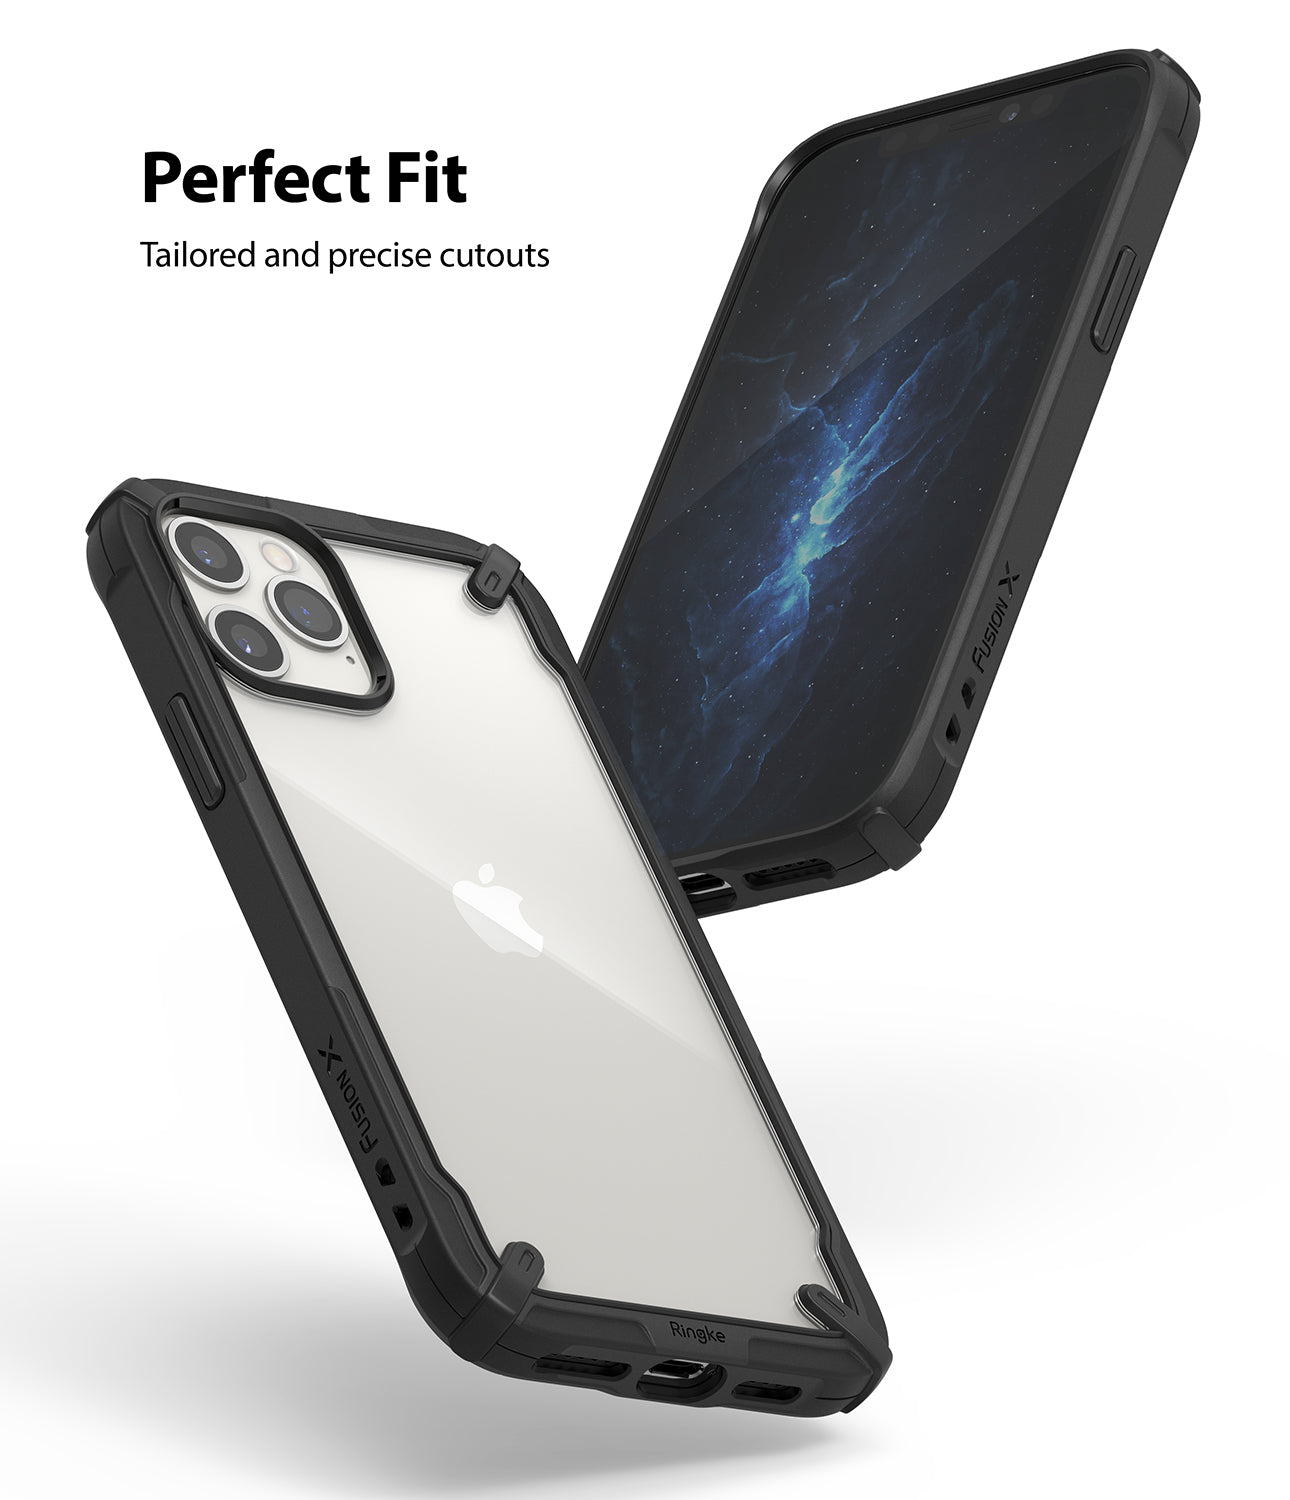 iPhone 12 Pro Max Case | Fusion-X [FX] - Ringke Official Store